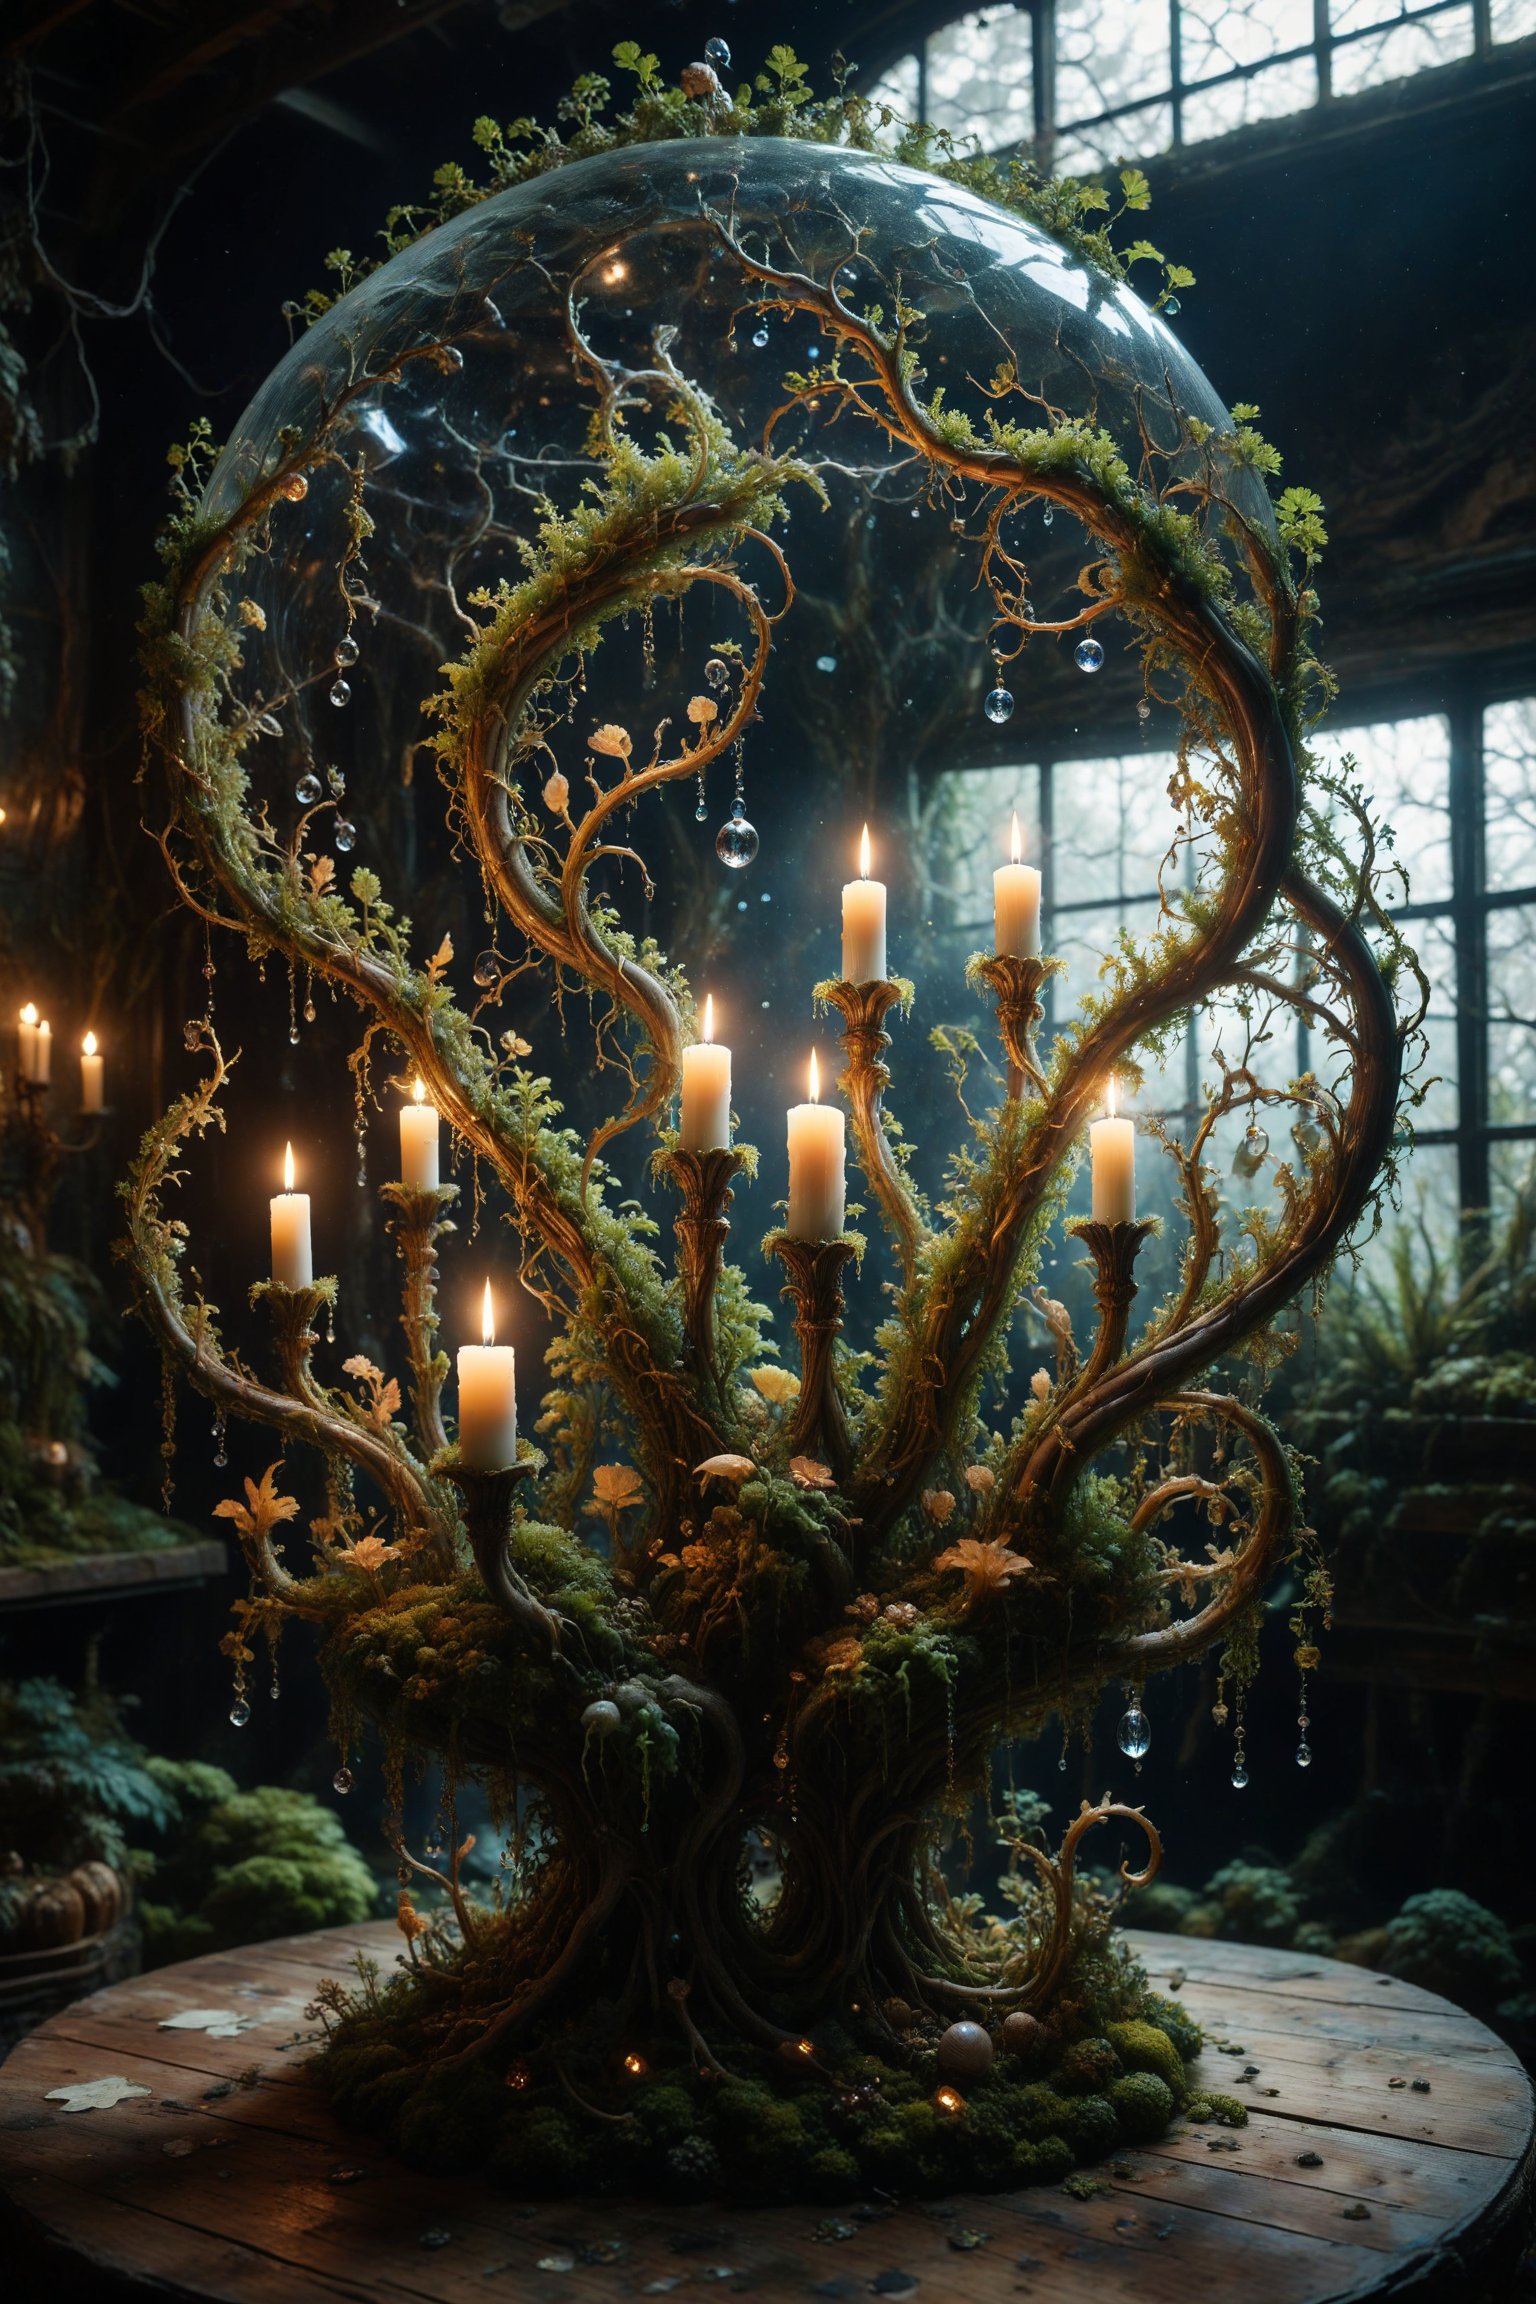 An aquarium with interesting, surreal organic curves, recreating an underwater forest of seaweed with candelabras resembling glowing vines. Inlaid seaweed, decorative gold accents, feathers, diamonds, and iridescent bubbles